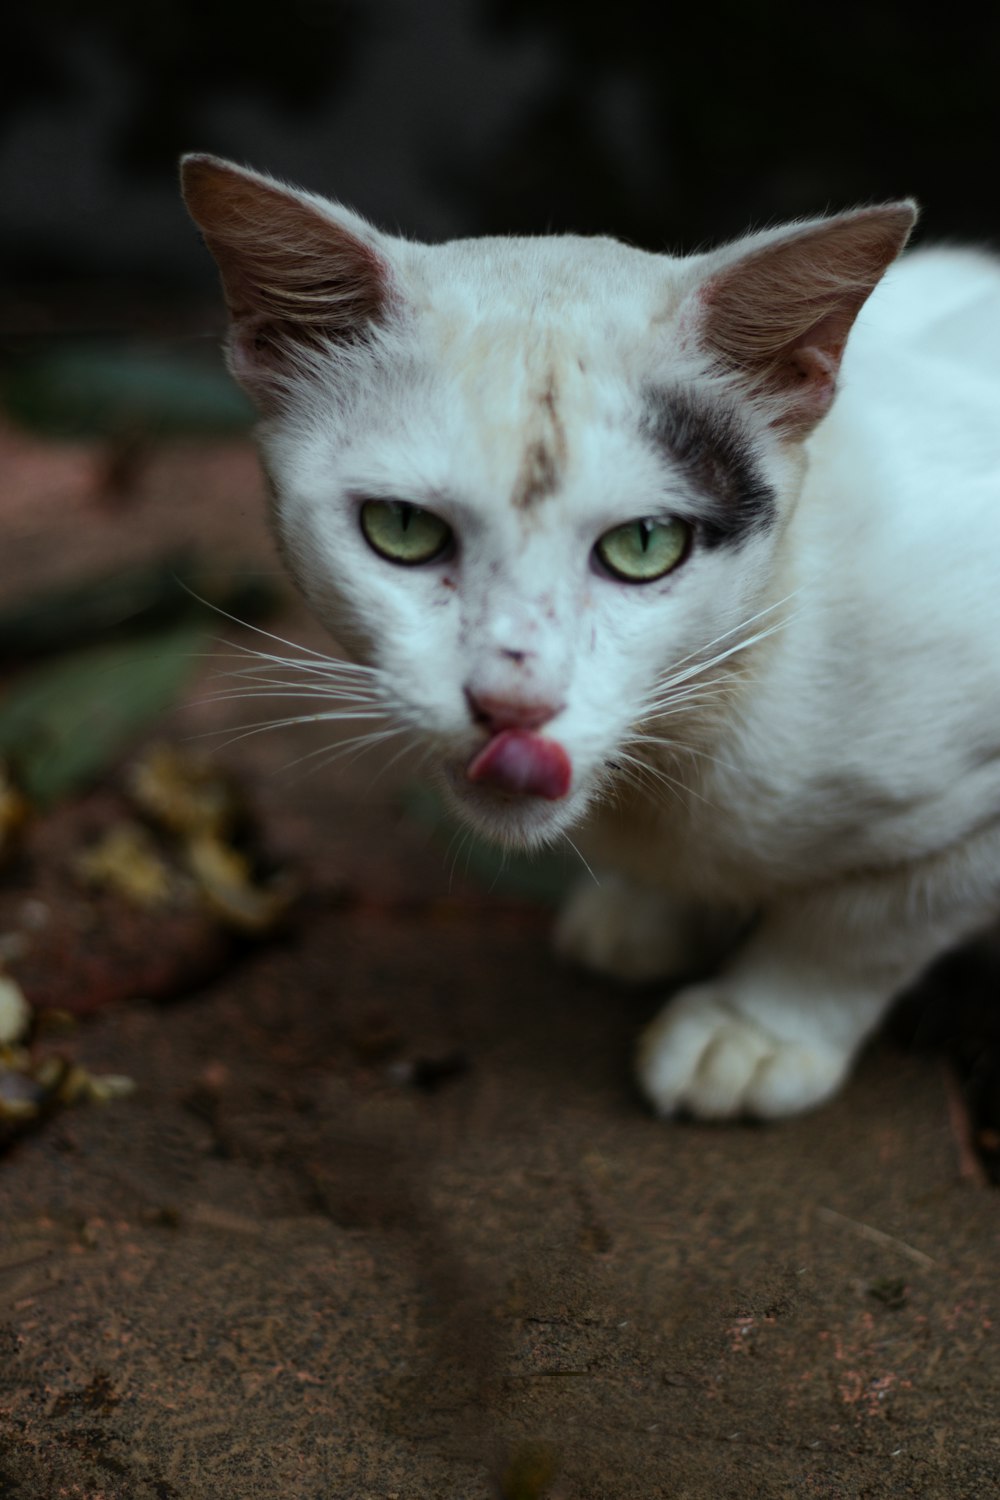 a cat licking its lips